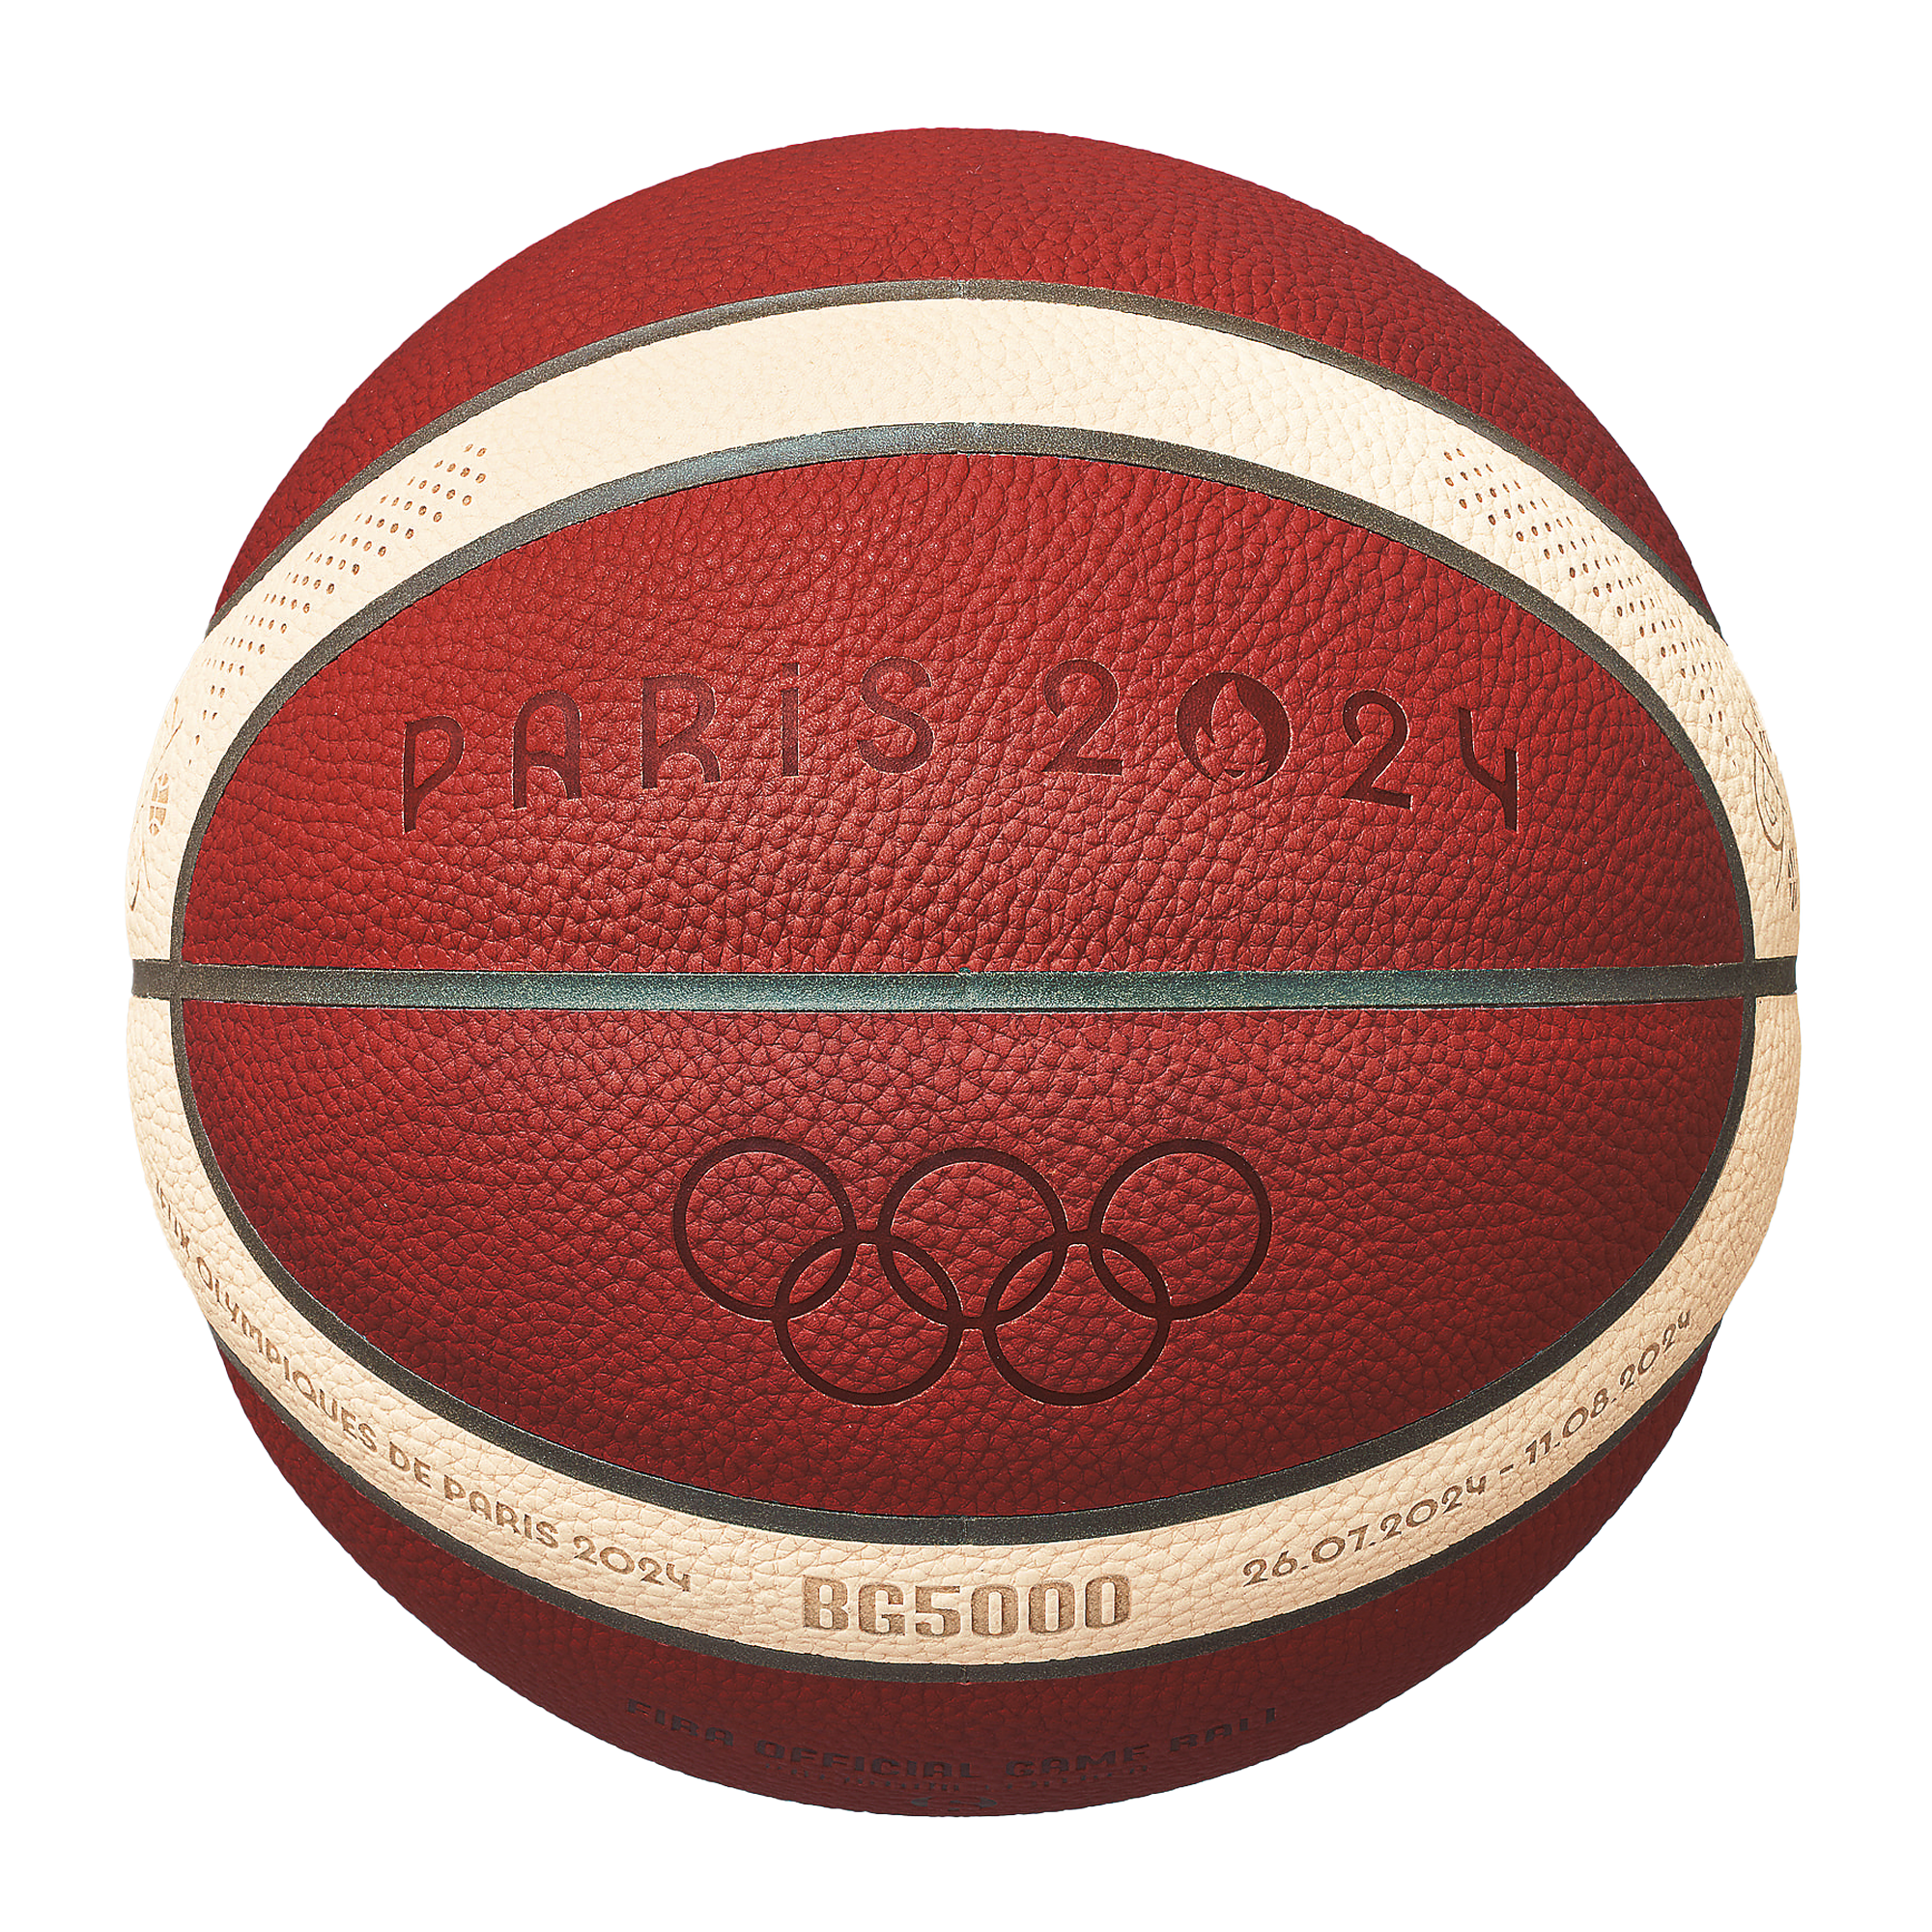 molten-basketball-B6G5000-S4F-S1.png